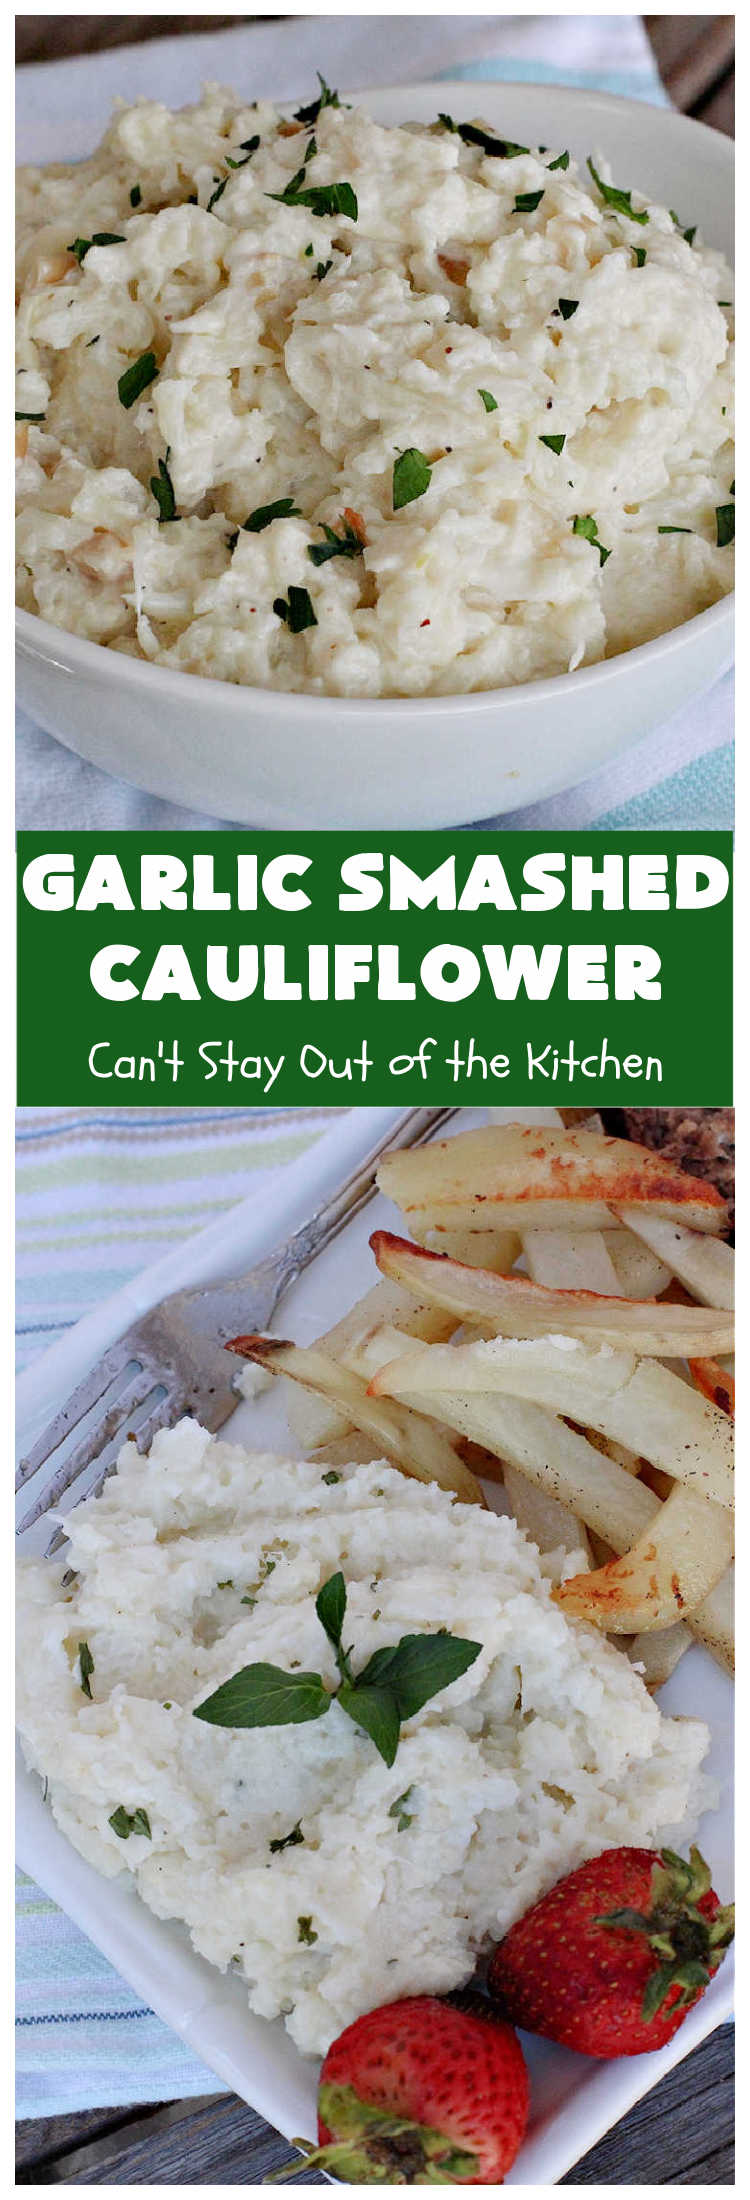 Garlic Smashed Cauliflower | Can't Stay Out of the Kitchen